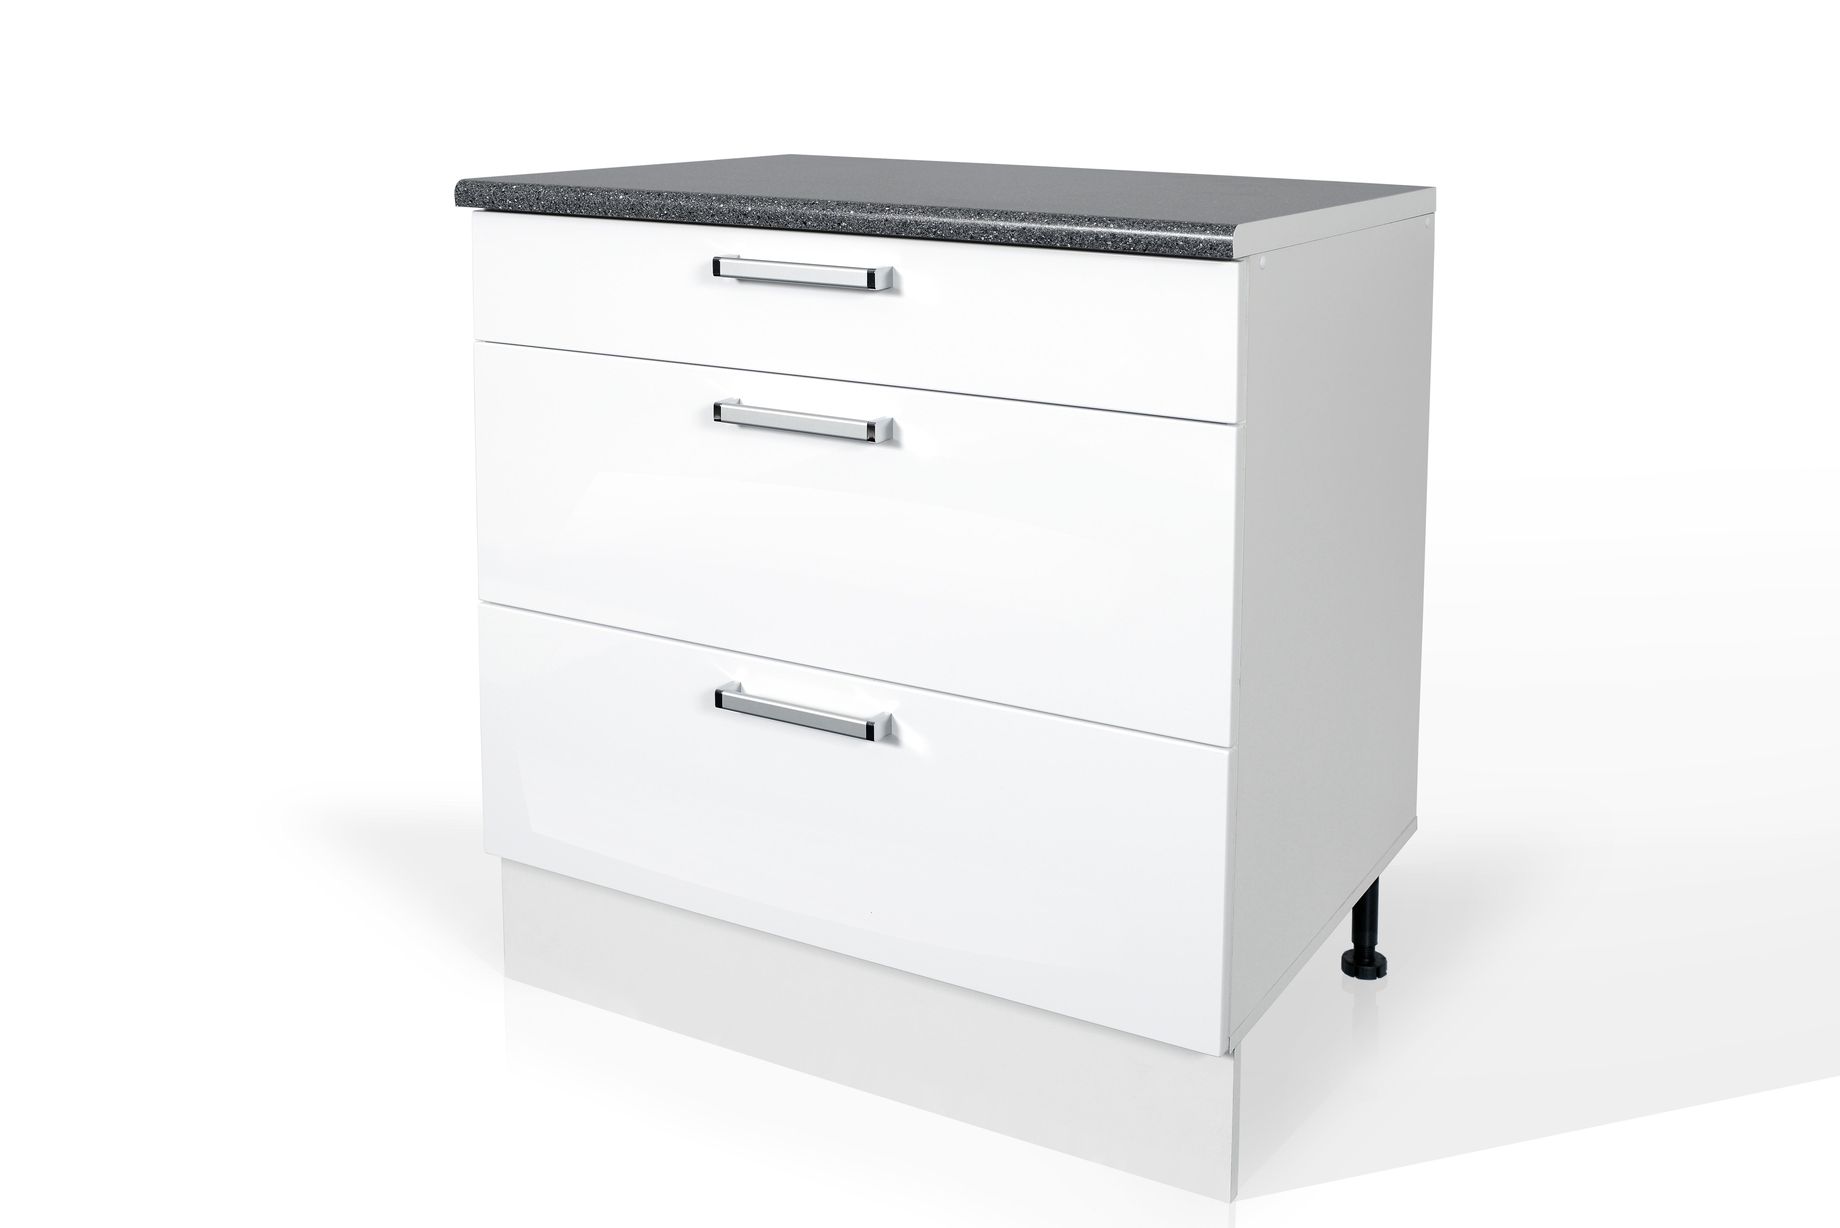 High Gloss White Base drawer cabinet S80SZ3 for kitchen 